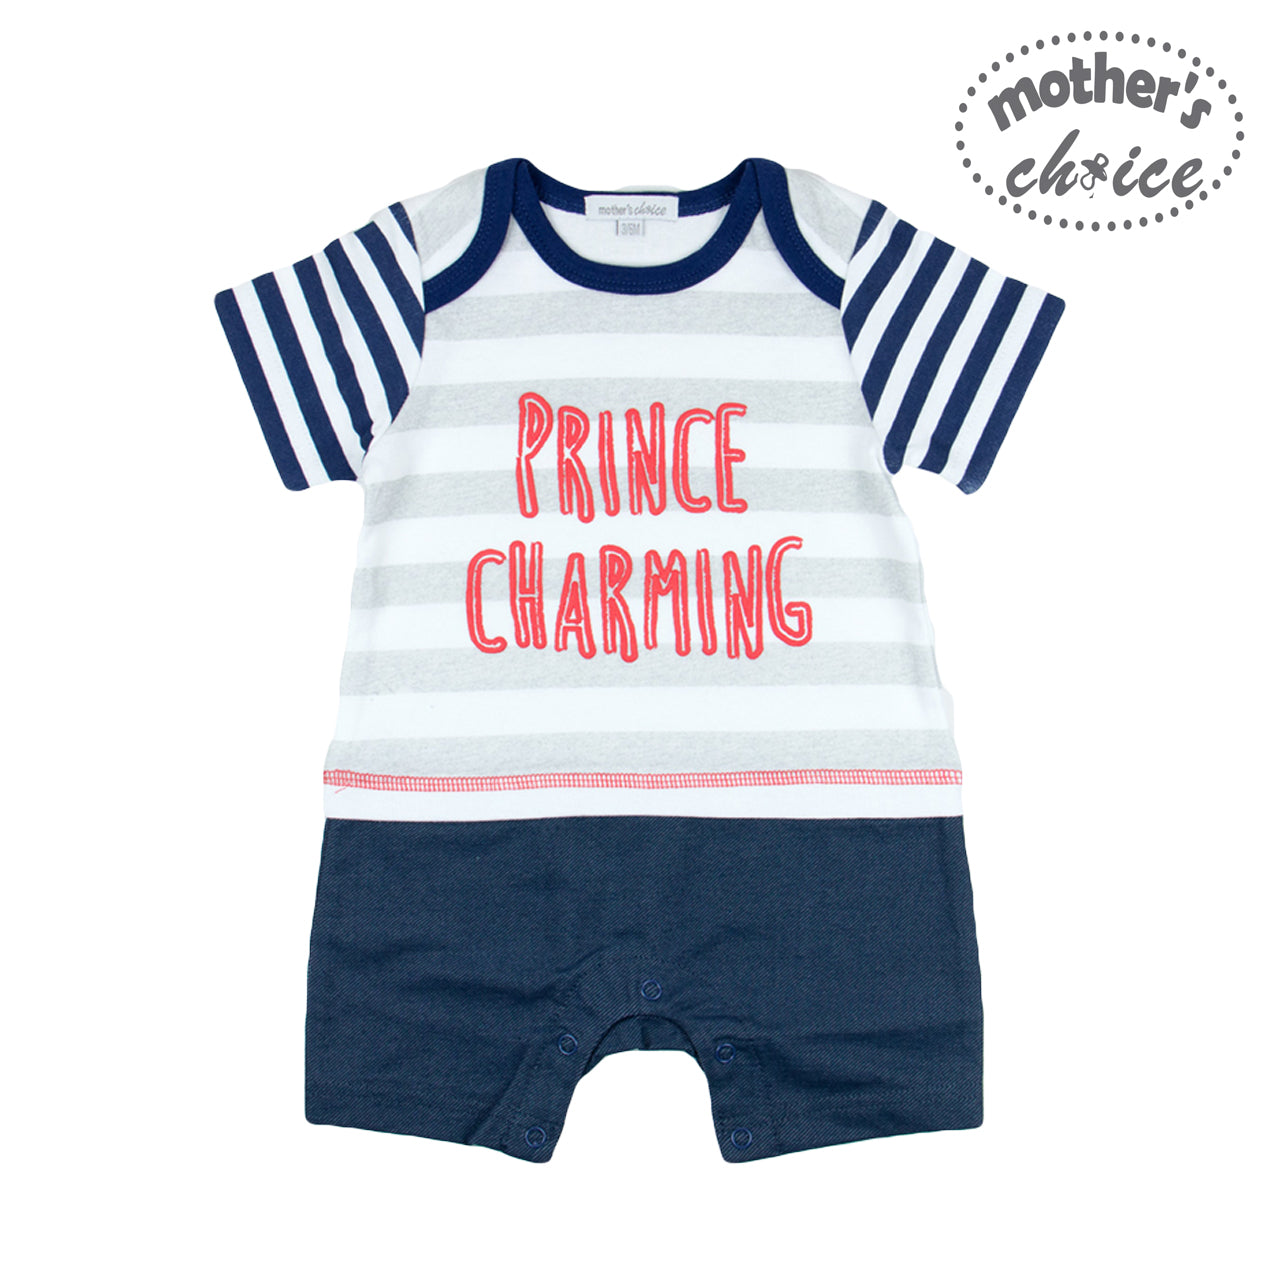 Mother's Choice 1 Piece Baby Short Sleeve Romper (Prince Charming/IT9560)